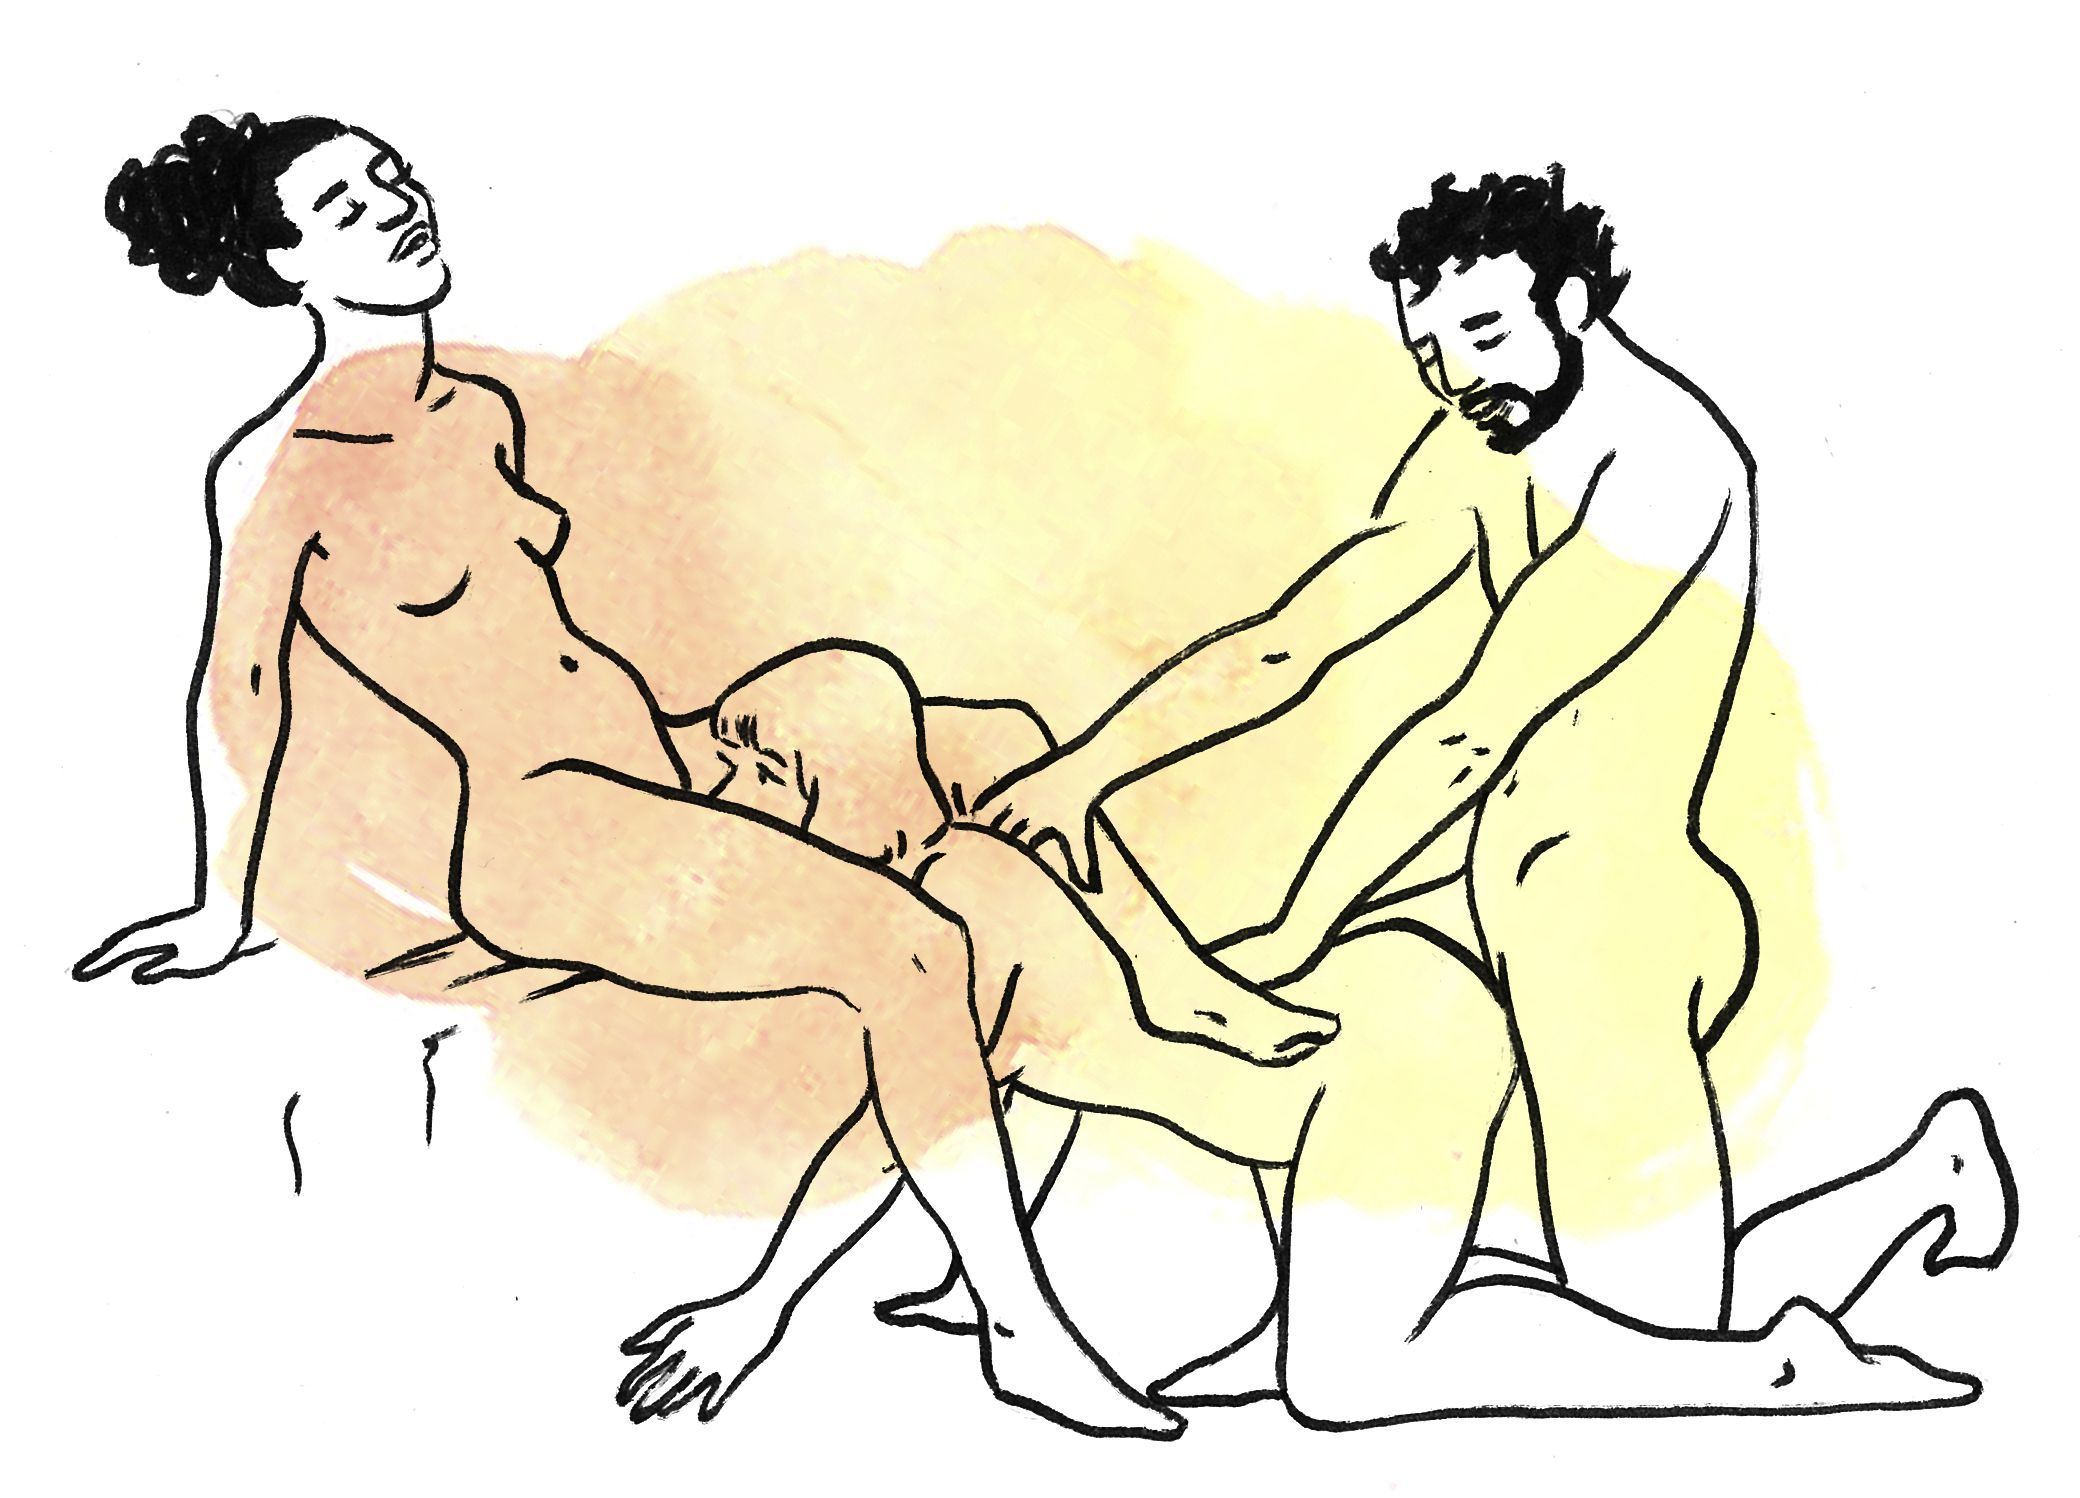 Positions to use during a threesome